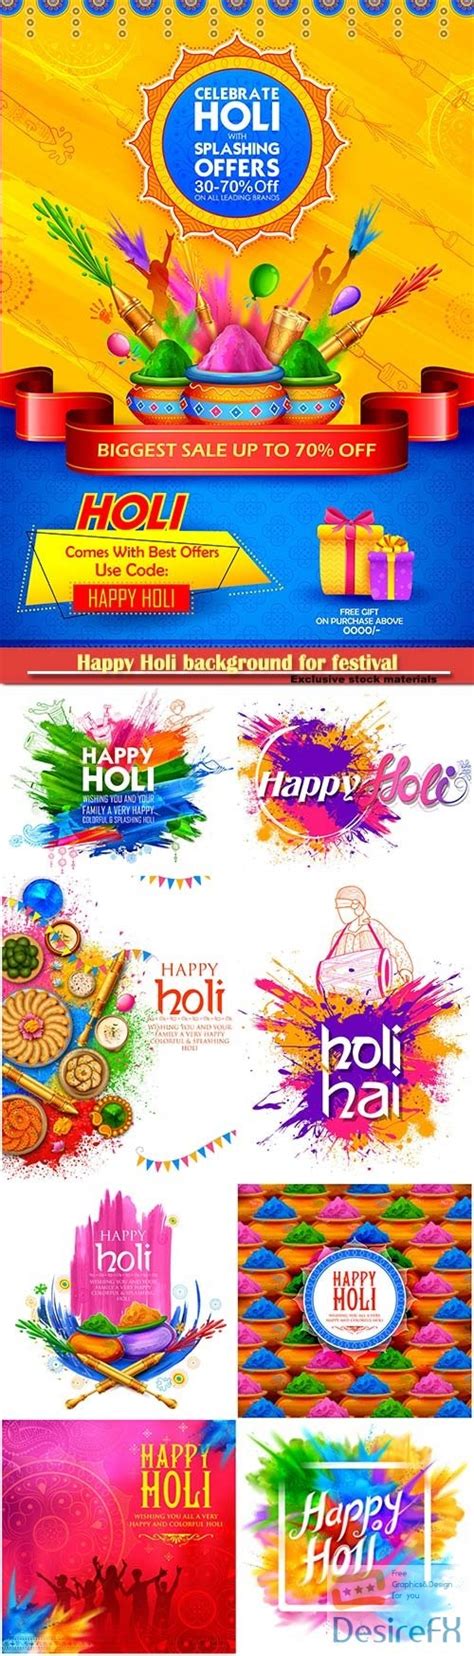 Download Happy Holi Background For Festival Of Colors